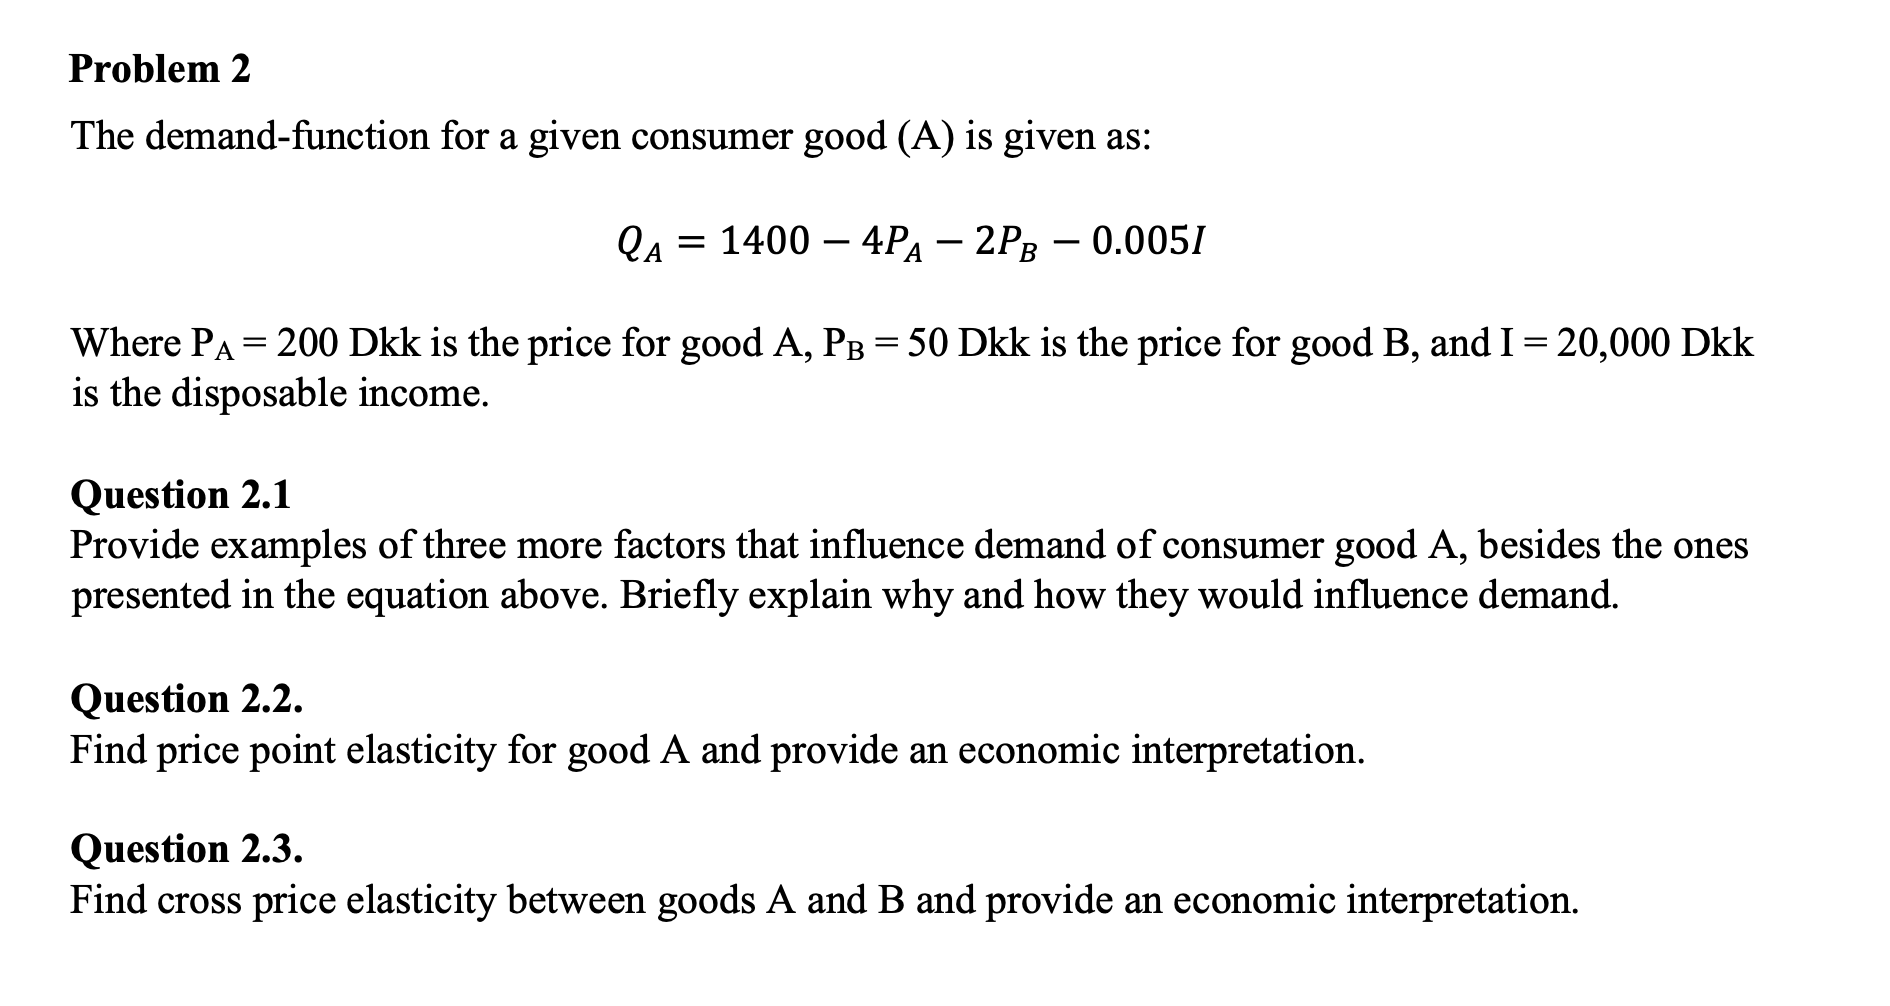 The demand-function for a given consumer good (A) is given as:
QA = 1400 – 4PA – 2PR – 0.0051
-
-
-
В
Where PA = 200 Dkk is the price for good A, PB = 50 Dkk is the price for good B, and I = 20,000 Dkk
is the disposable income.
||
Question 2.1
Provide examples of three more factors that influence demand of consumer good A, besides the ones
presented in the equation above. Briefly explain why and how they would influence demand.
Question 2.2.
Find price point elasticity for good A and provide an economic interpretation.
Question 2.3.
Find cross price elasticity between goods A and B and provide an economic interpretation.
